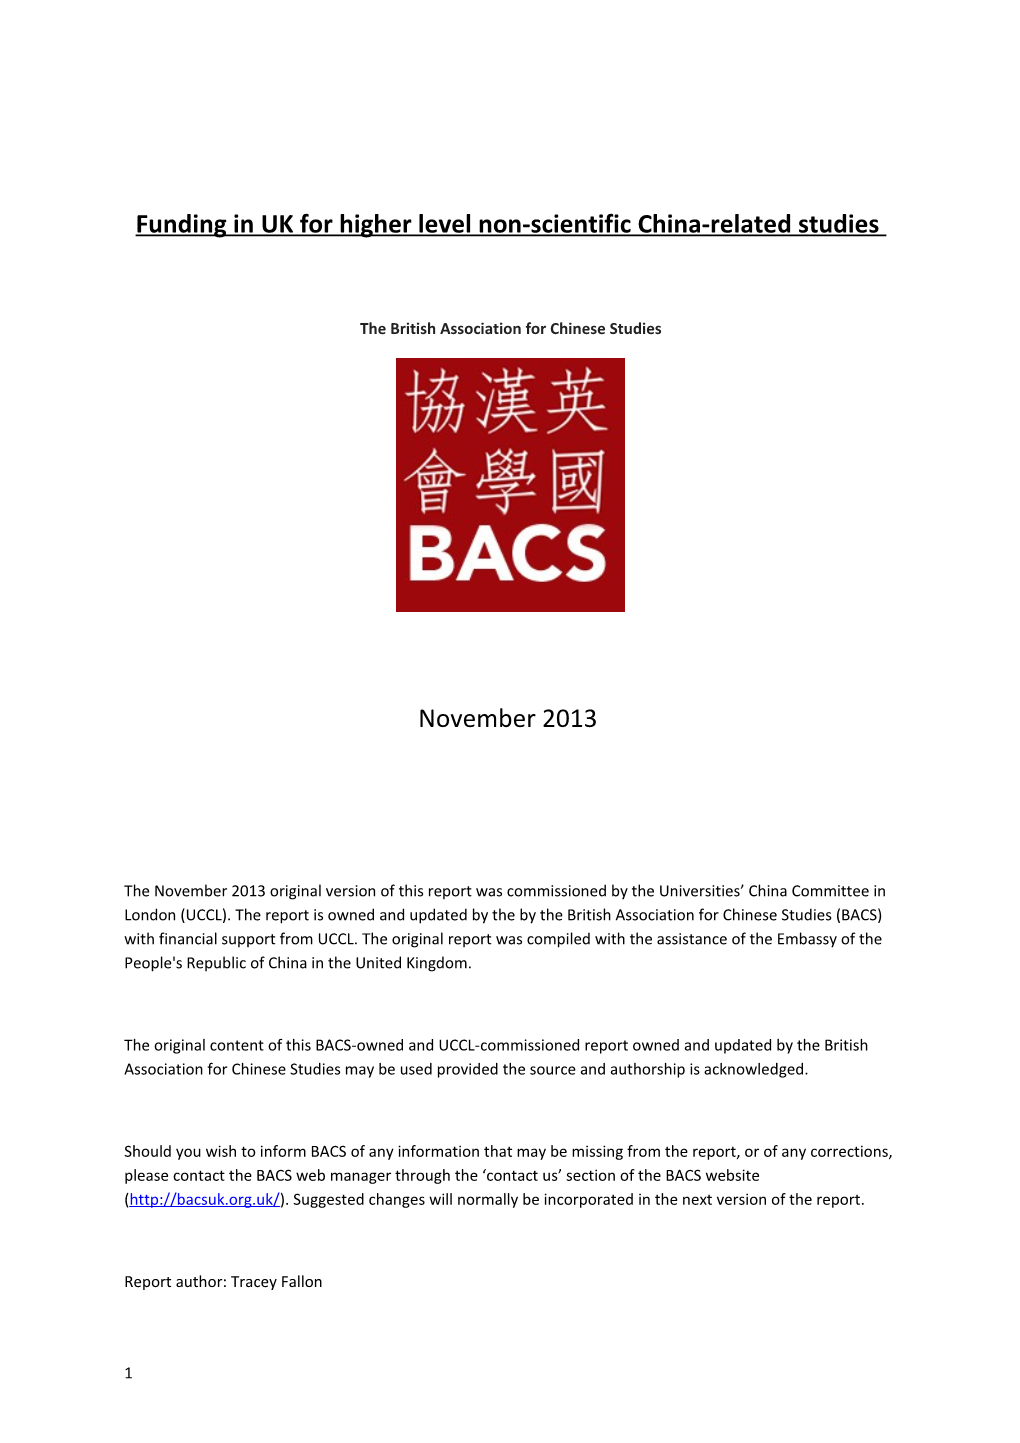 Funding in UK for Higher Level Non-Scientific China-Related Studies